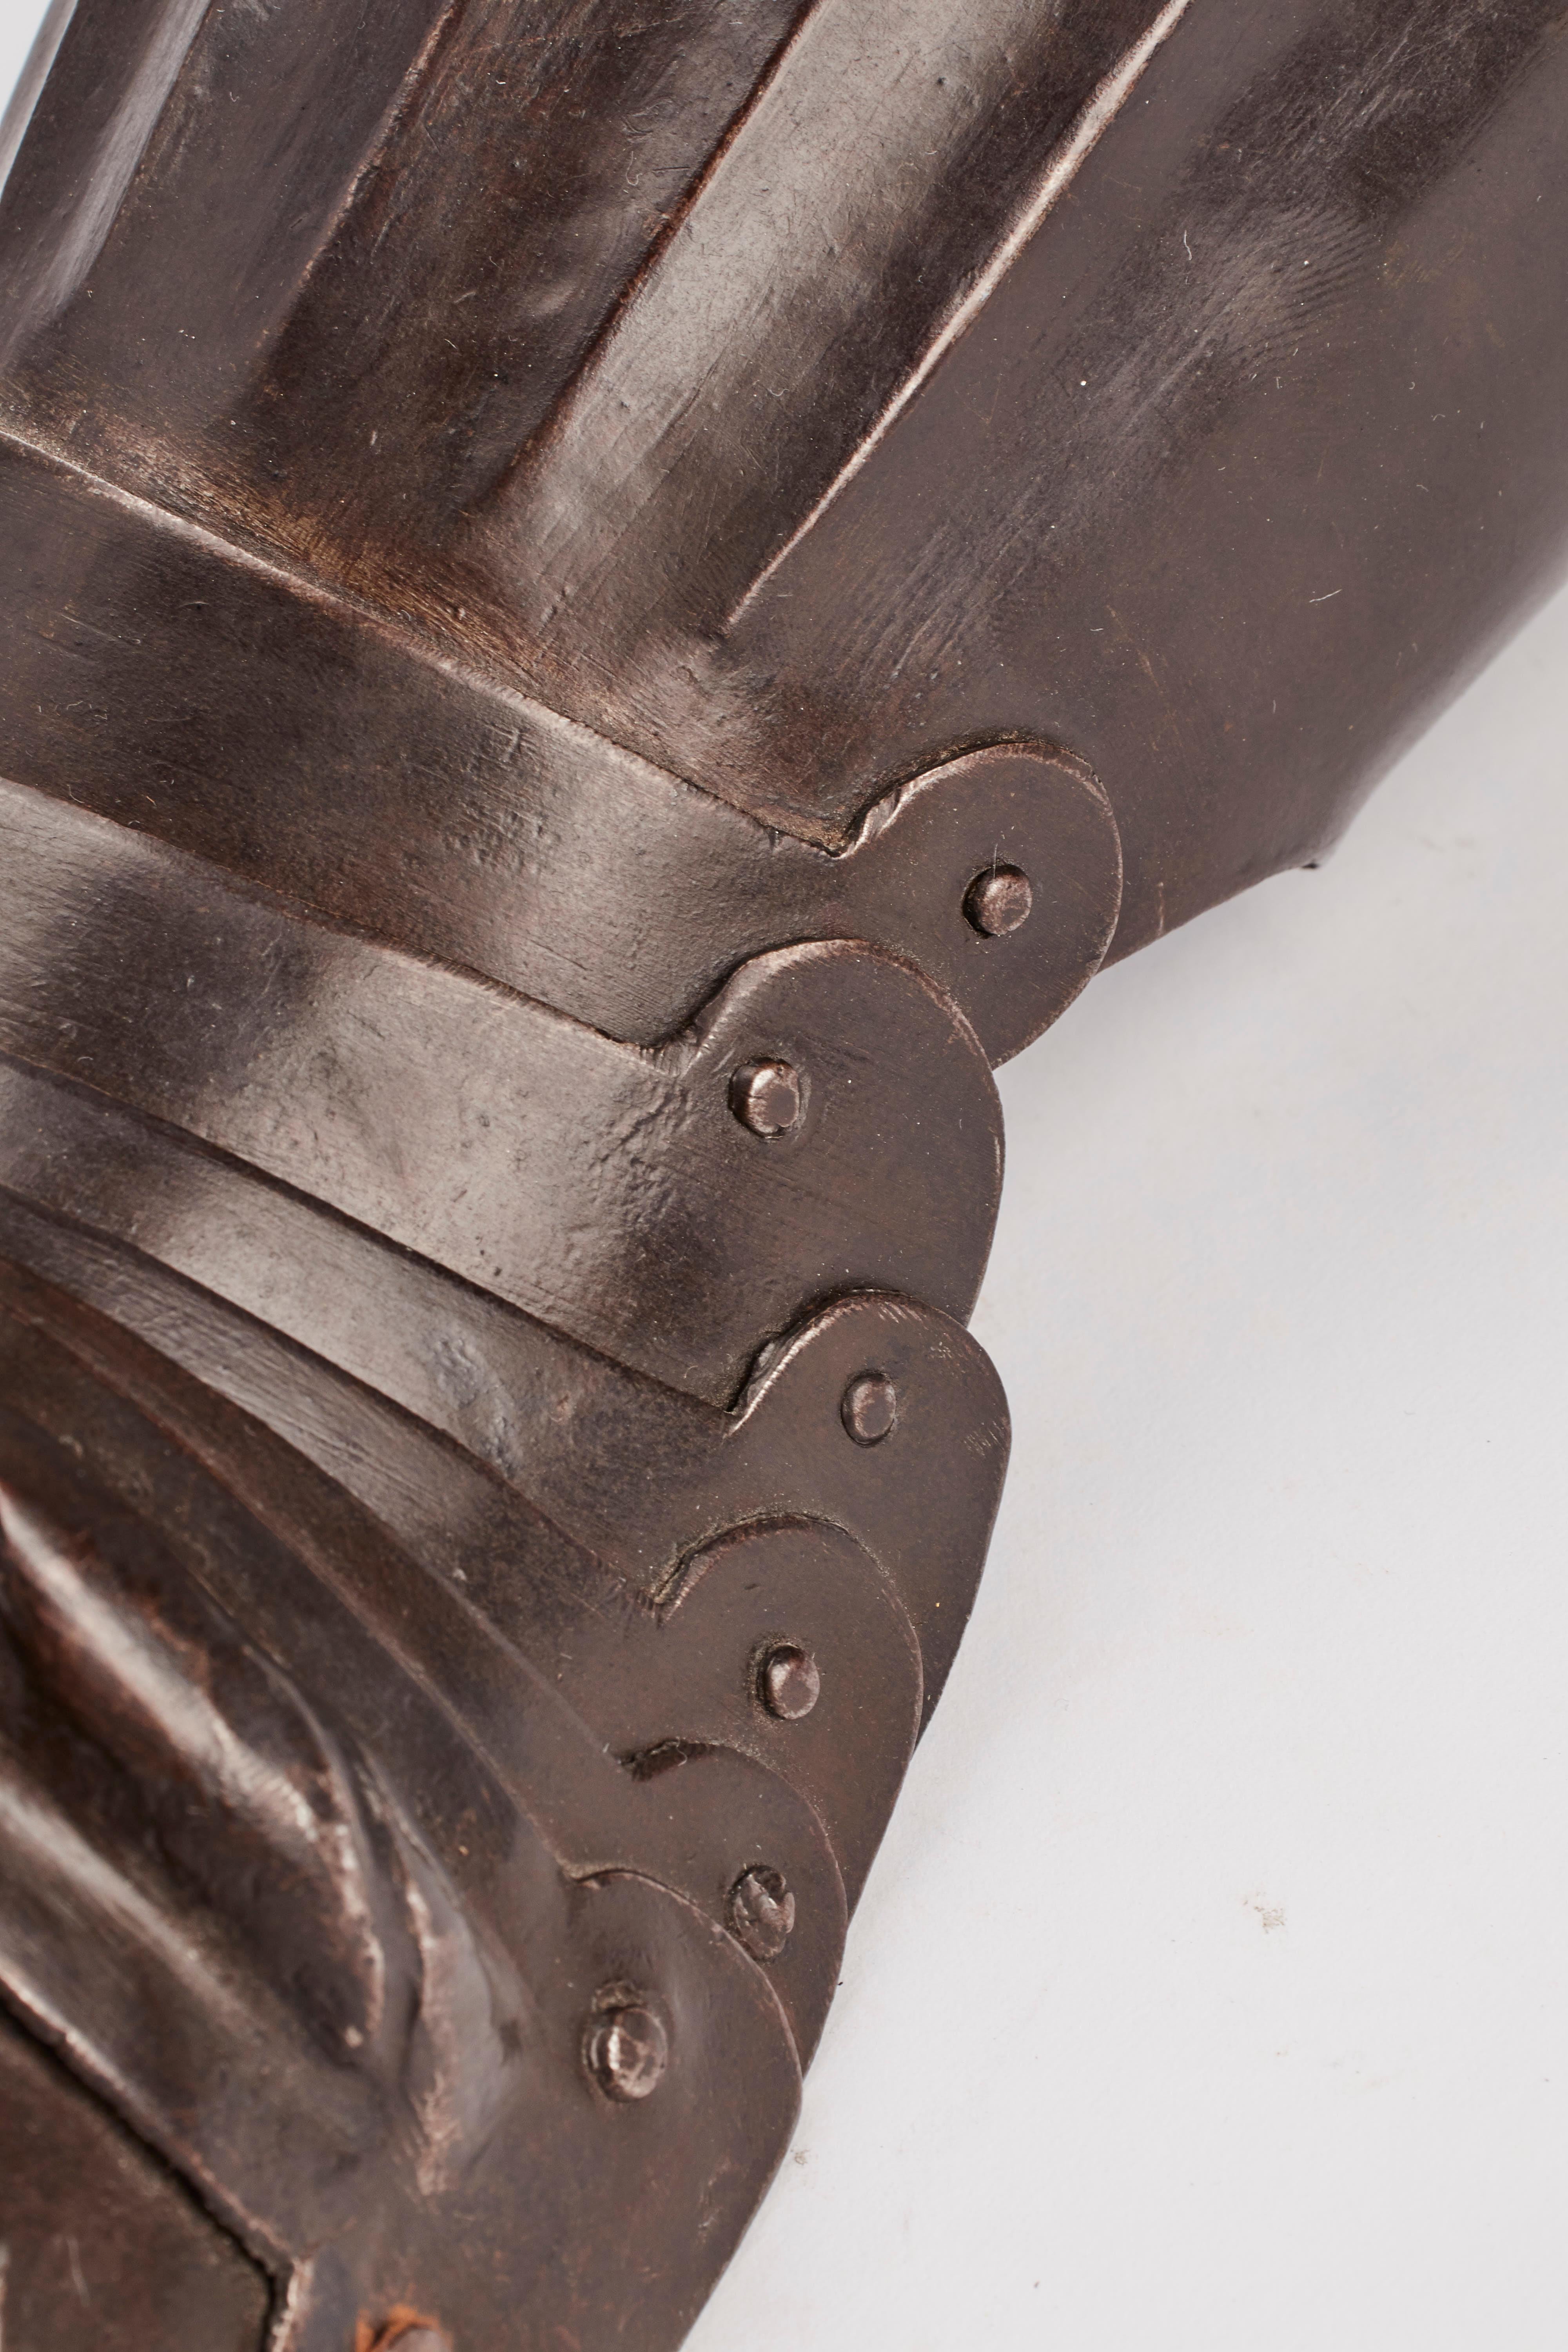 A pair of Gauntlet made in Brescia, Lombardy, Italy, beginning the 17th century. Brescia, the most important and worldwide famous area of production of the best arms and armors at the time. The structure and finishing reflect the German similar